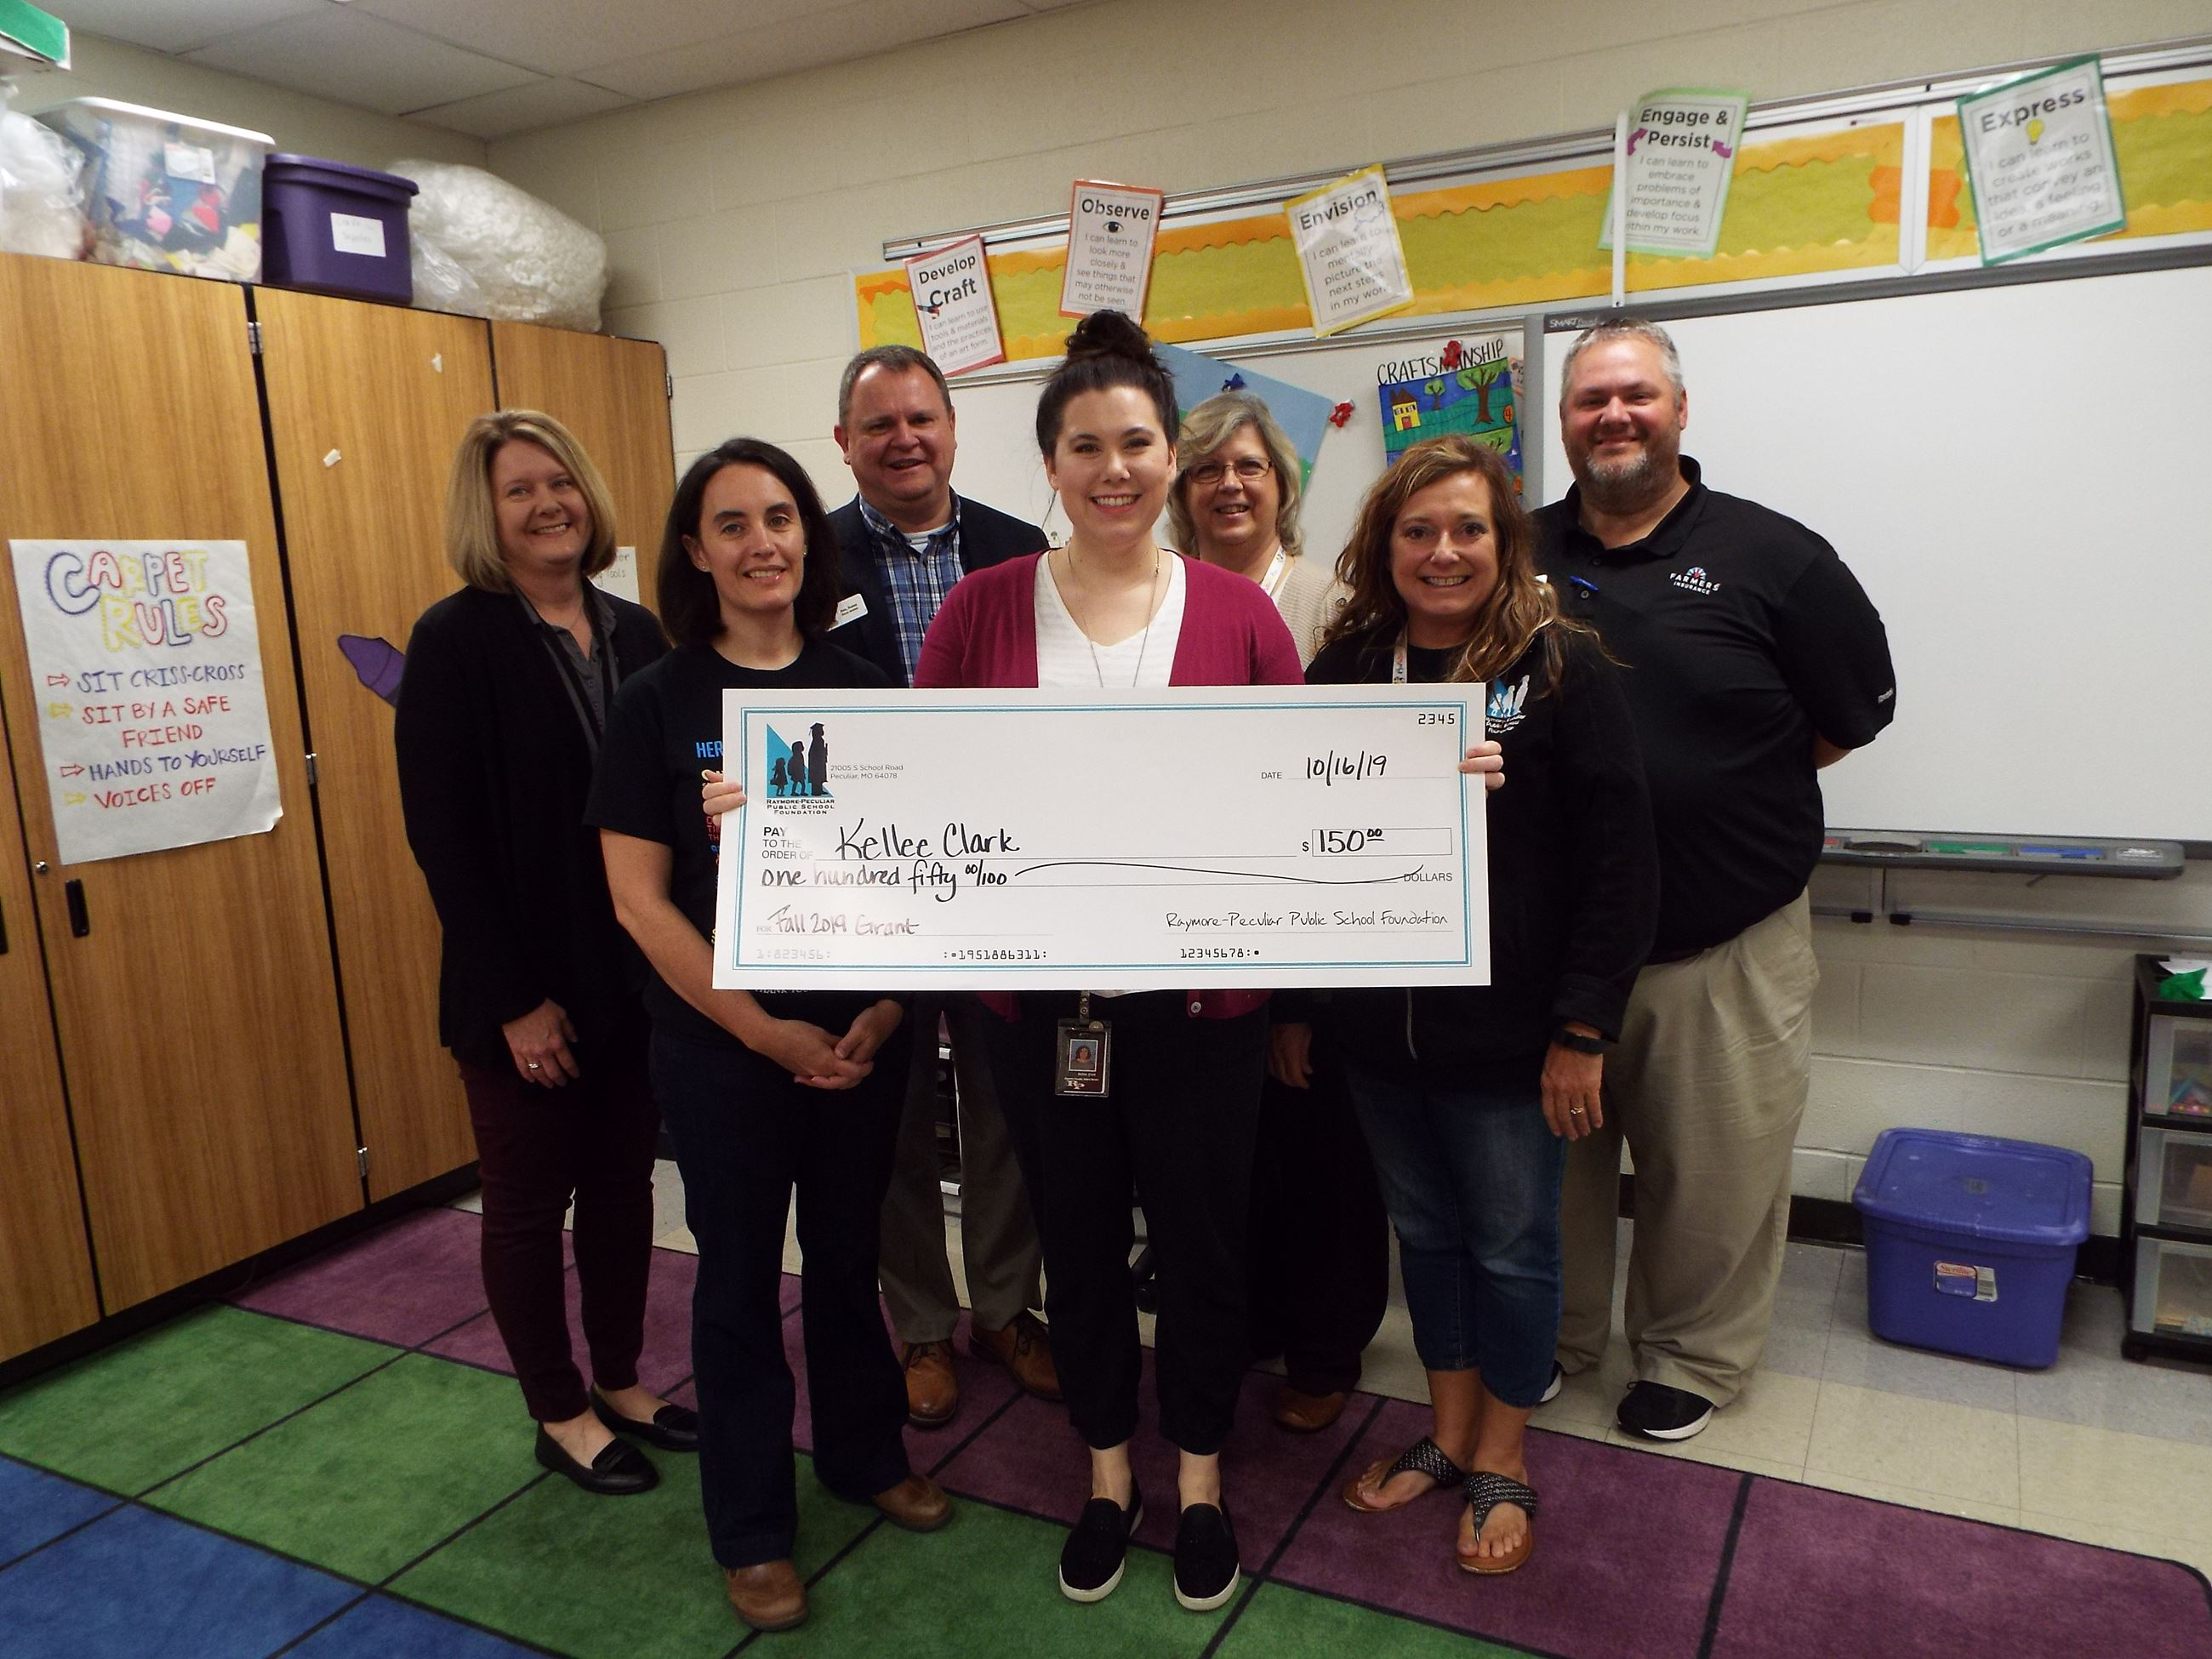 Kellee Clark, who teaches art at Raymore Elementary, received a $150 grant to purchase a sewing machine to use for fiber arts projects.